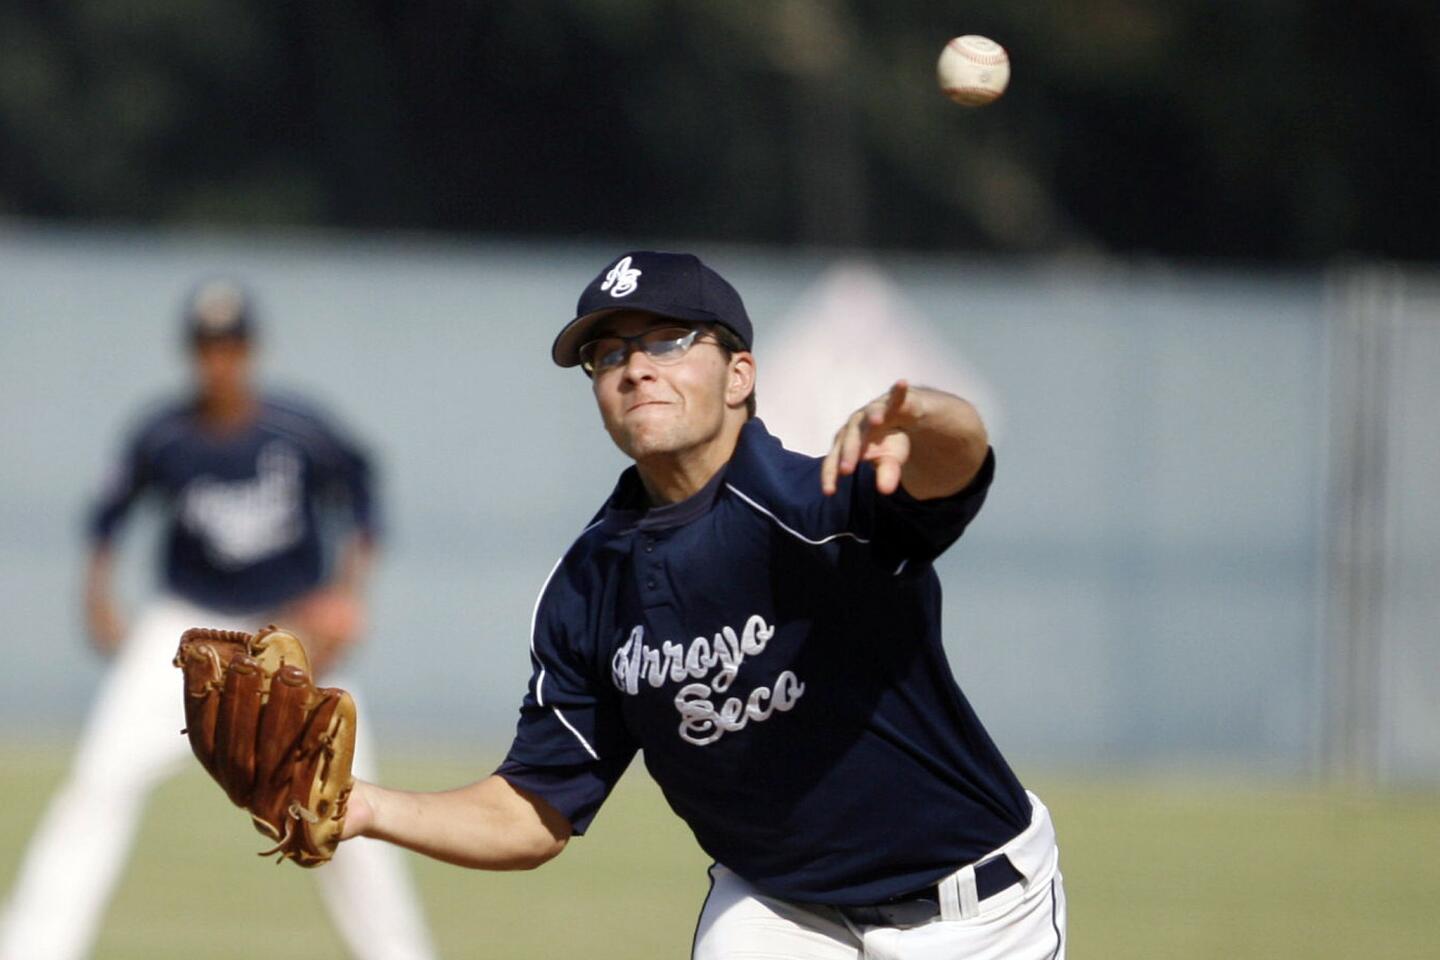 Arroyo Seco's Elliot Surrey pitches the ball during a game against Puerto Rico, which took place at Major League Baseball Urban Youth Academy in Compton on Thursday, August 3, 2012.